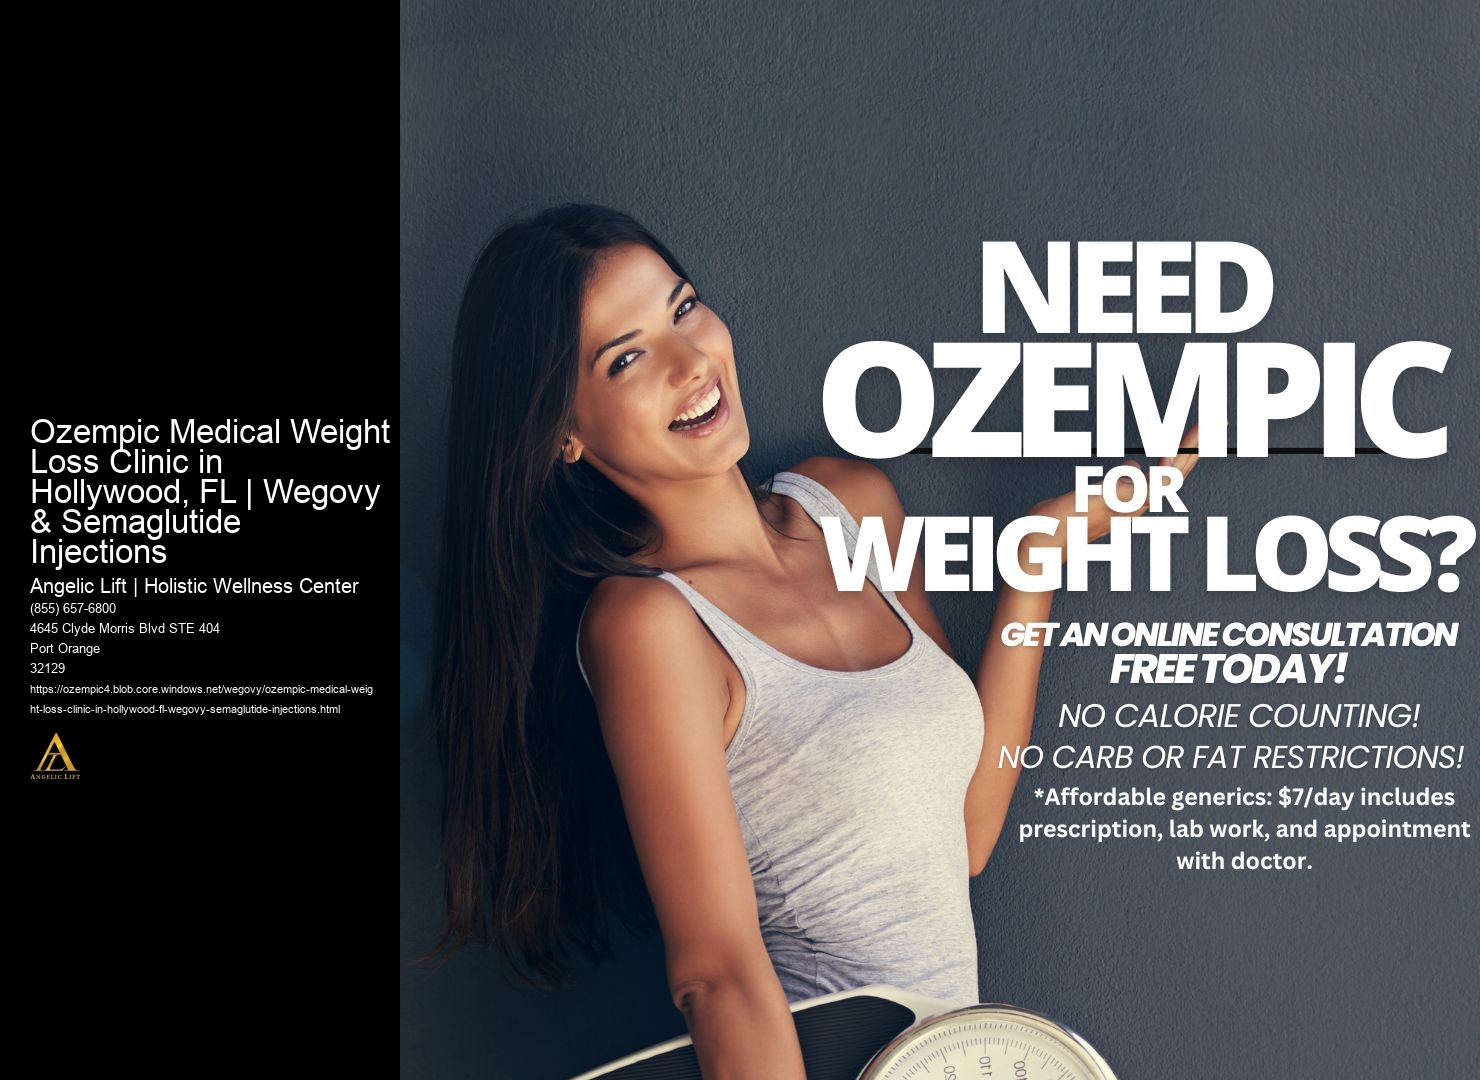 Ozempic Medical Weight Loss Clinic in Hollywood, FL | Wegovy & Semaglutide Injections